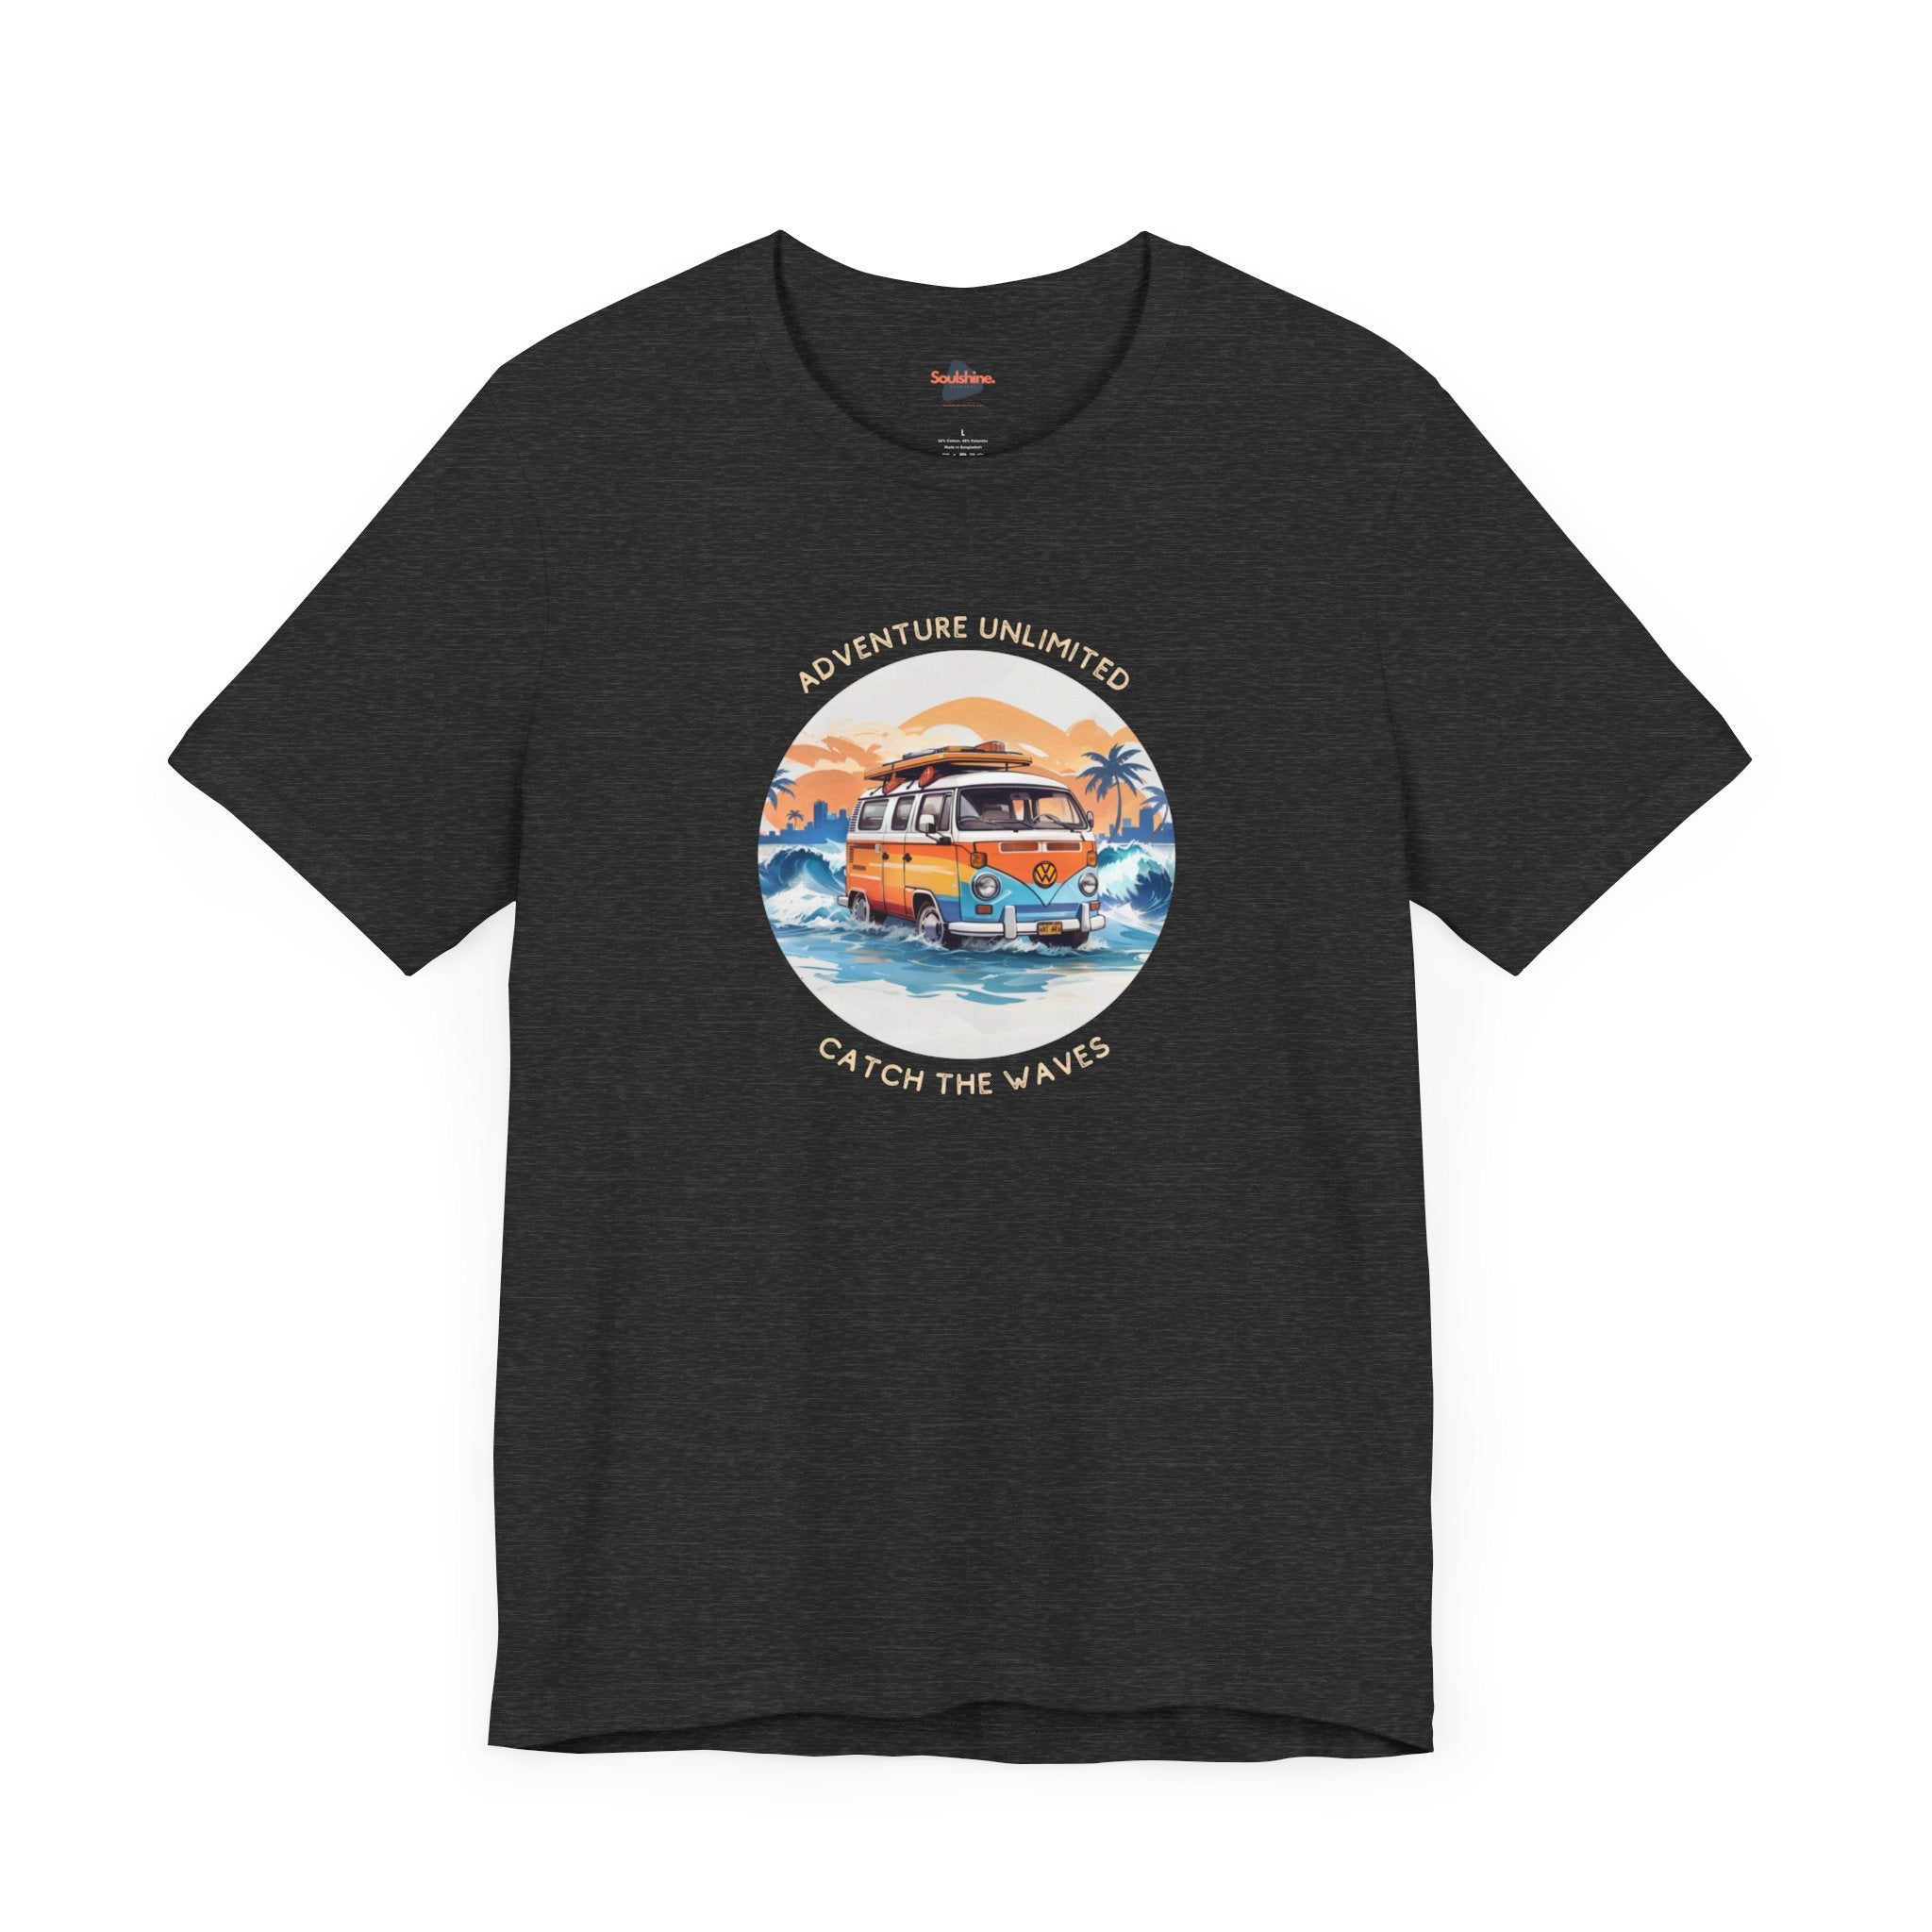 Adventure Unlimited black t-shirt with scenic van on beach printed - direct-to-garment item